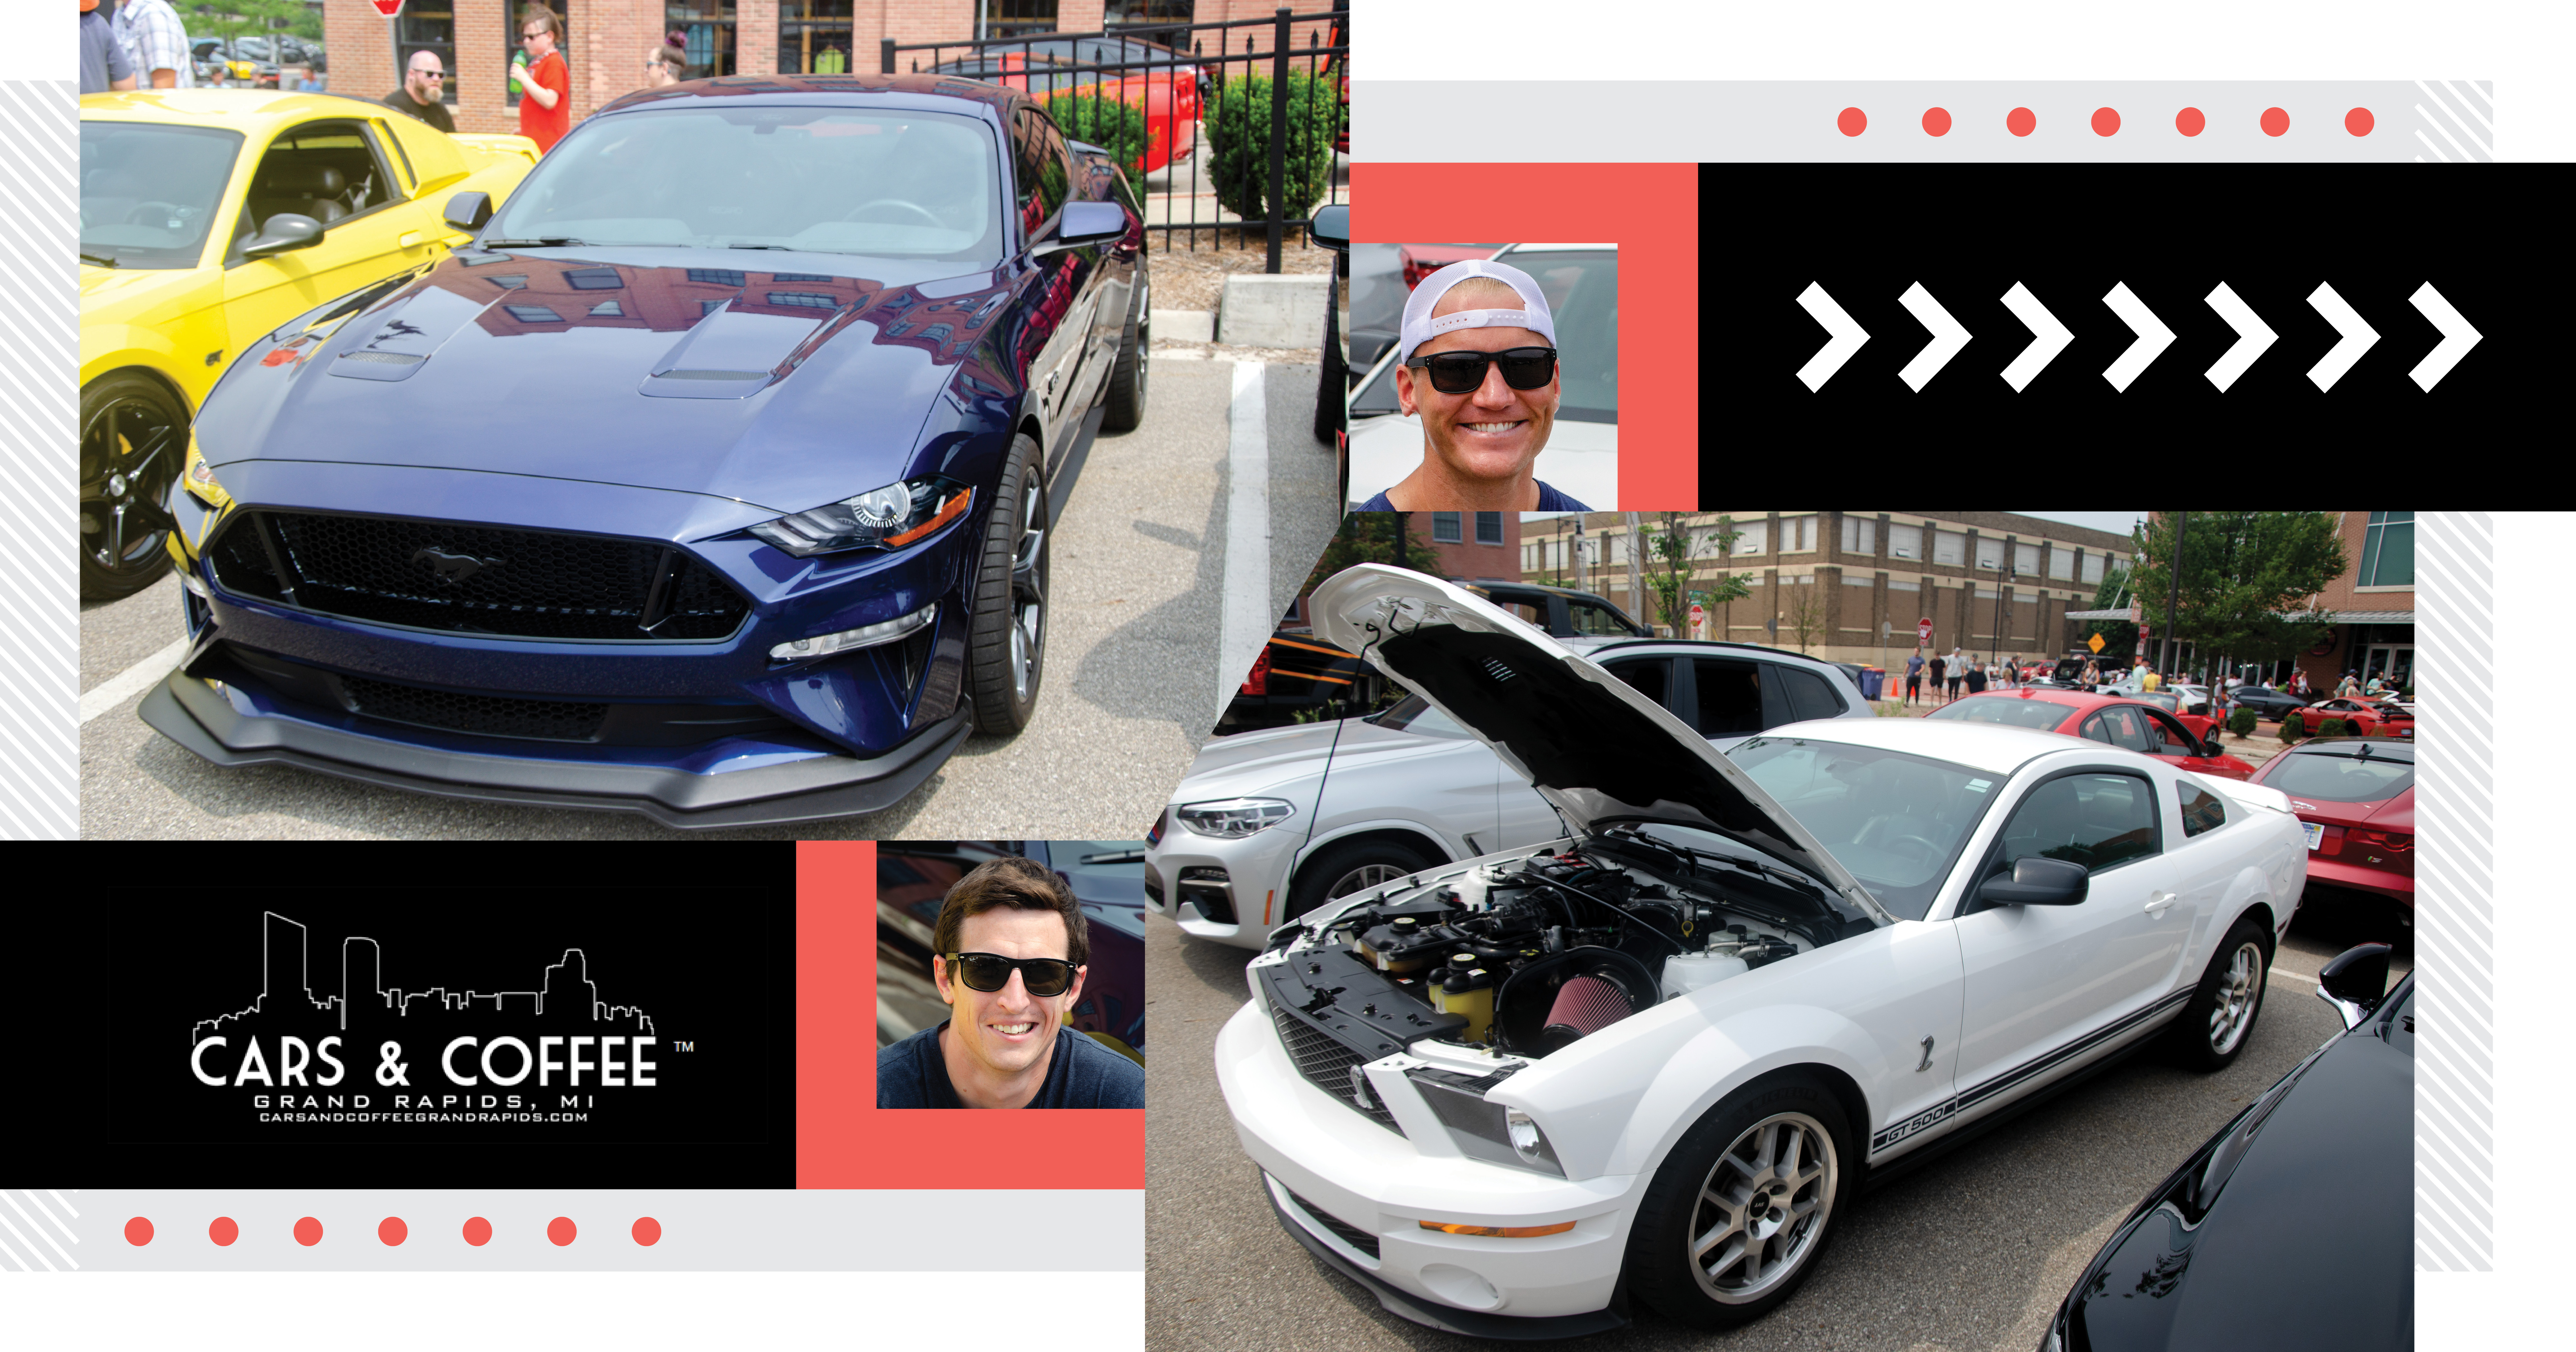 Gentex Employees Show Off Their Mustangs at Cars & Coffee Events Featured Image